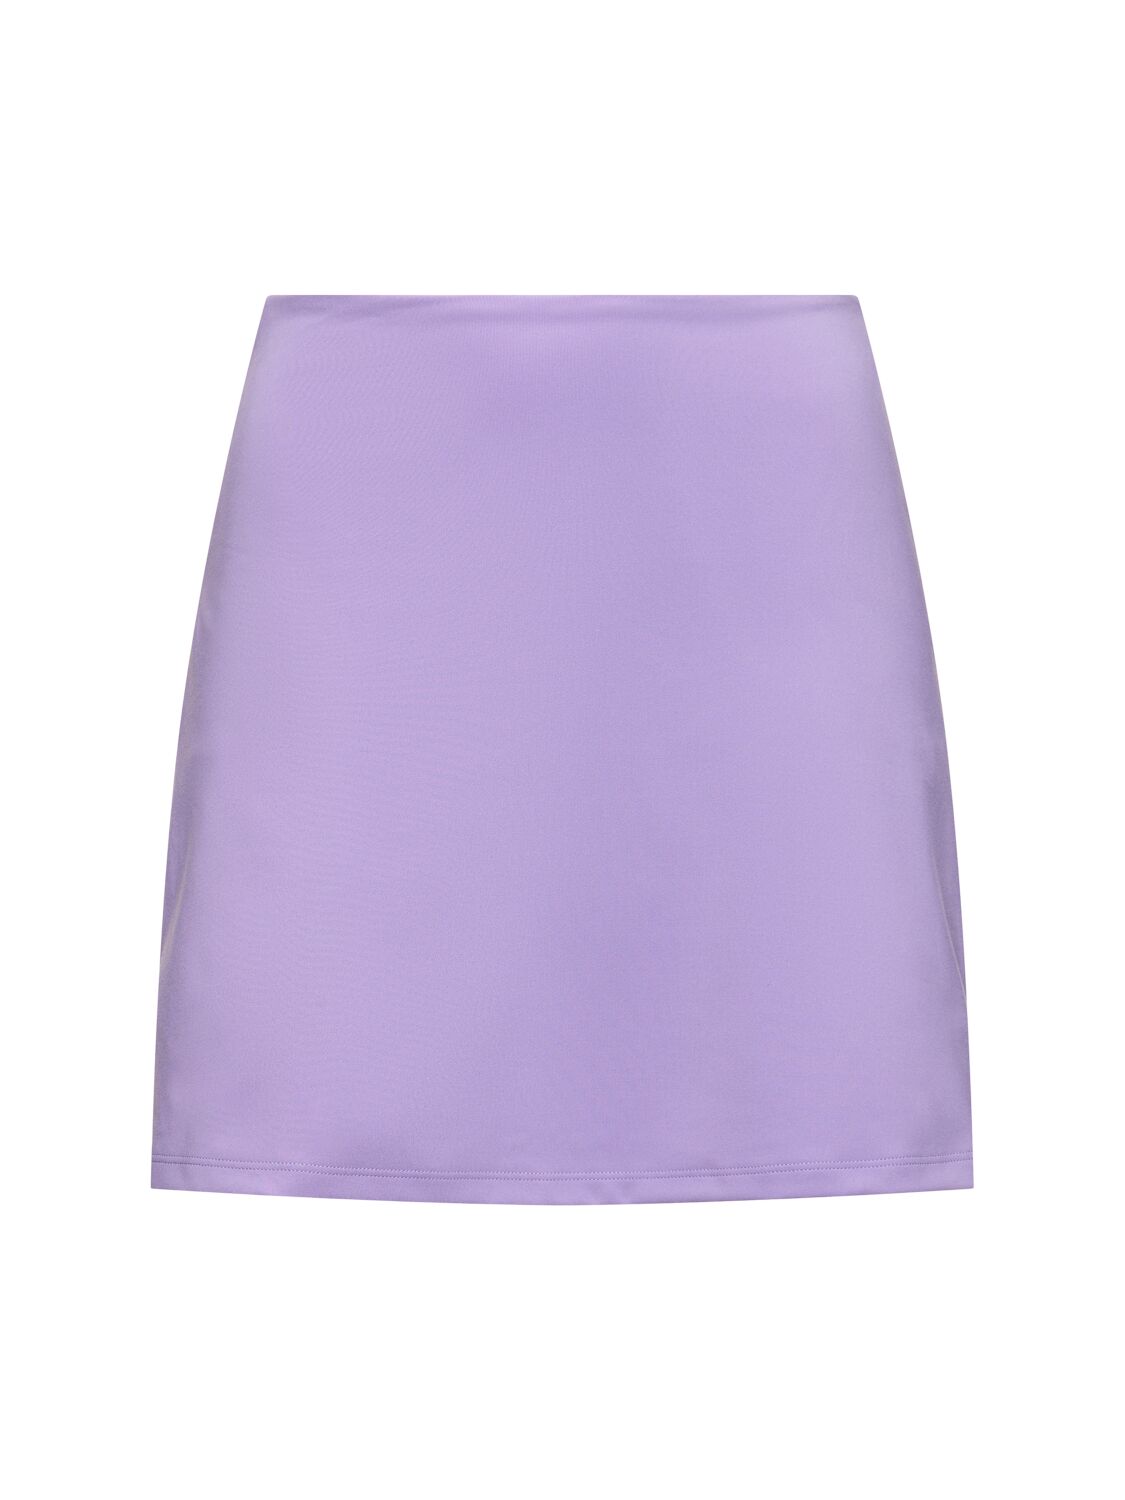 Girlfriend Collective The High Rise Skort In Purple